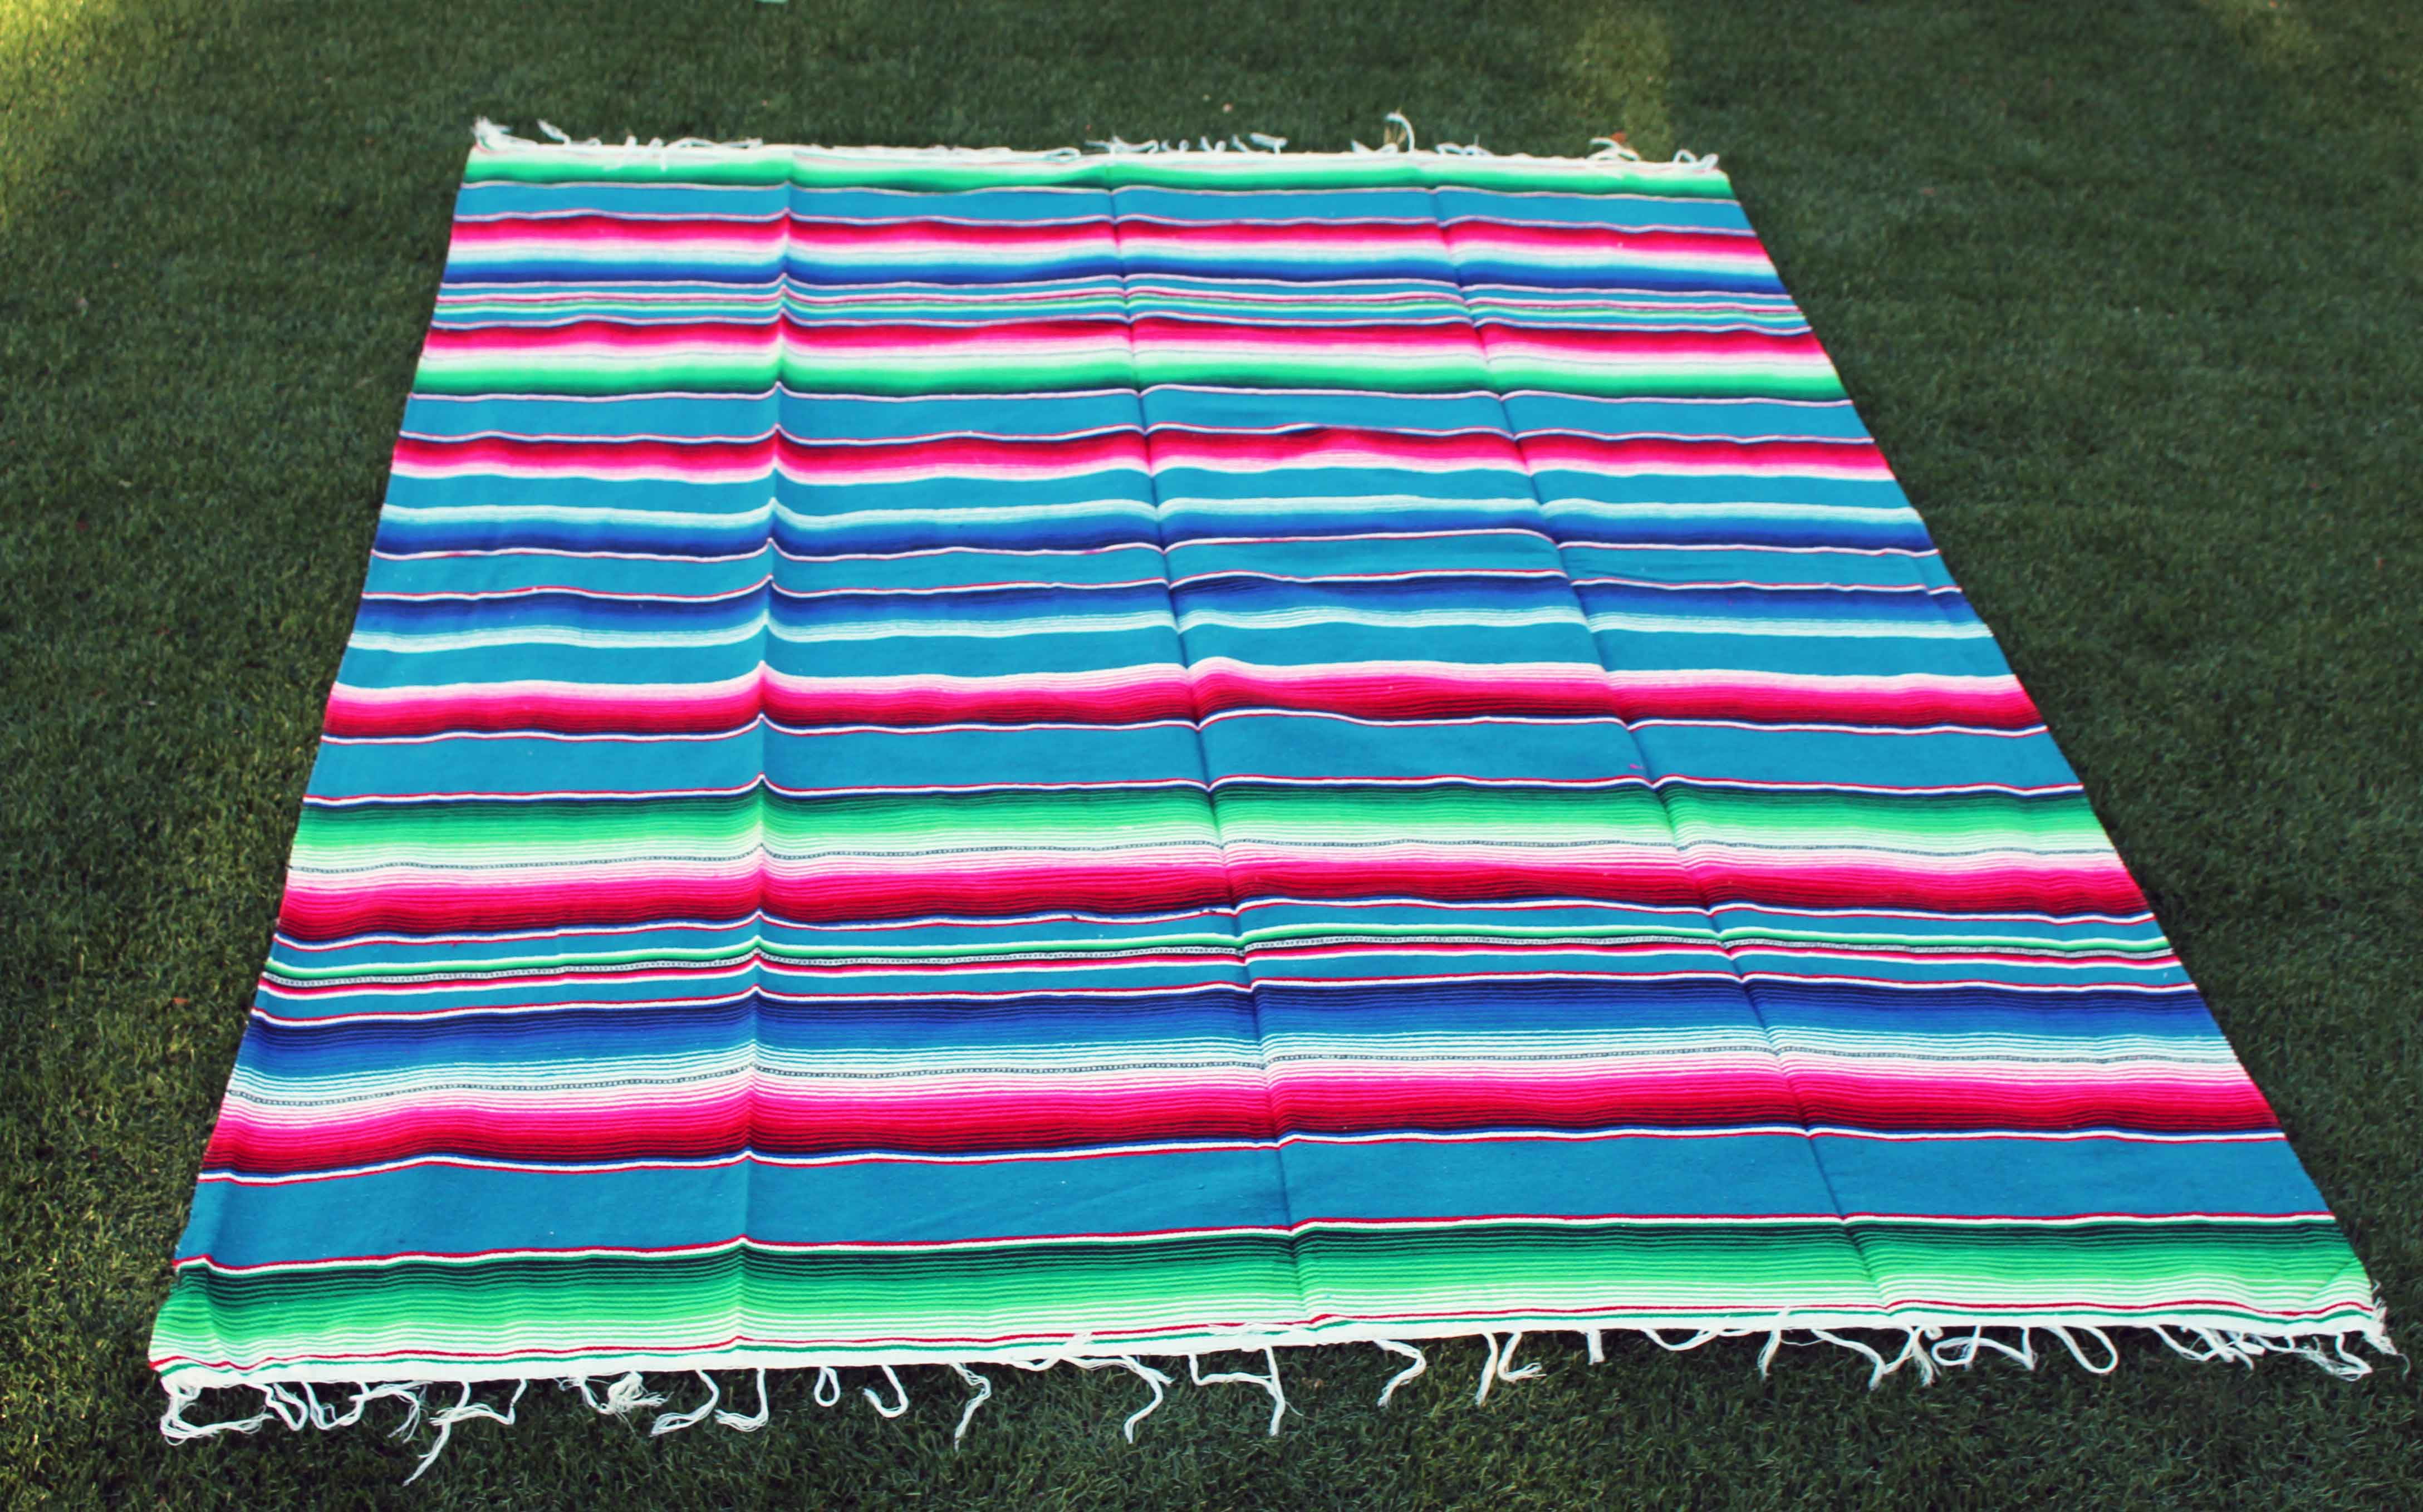 Woven Blanket Perfect Yoga Meditation Mat Authentic Navajo Blanket Outdoor Throw Blanket for Picnic Camping Scuddles Premium Mexican Blanket Beautiful Serape Blanket Fabric Blue Car 